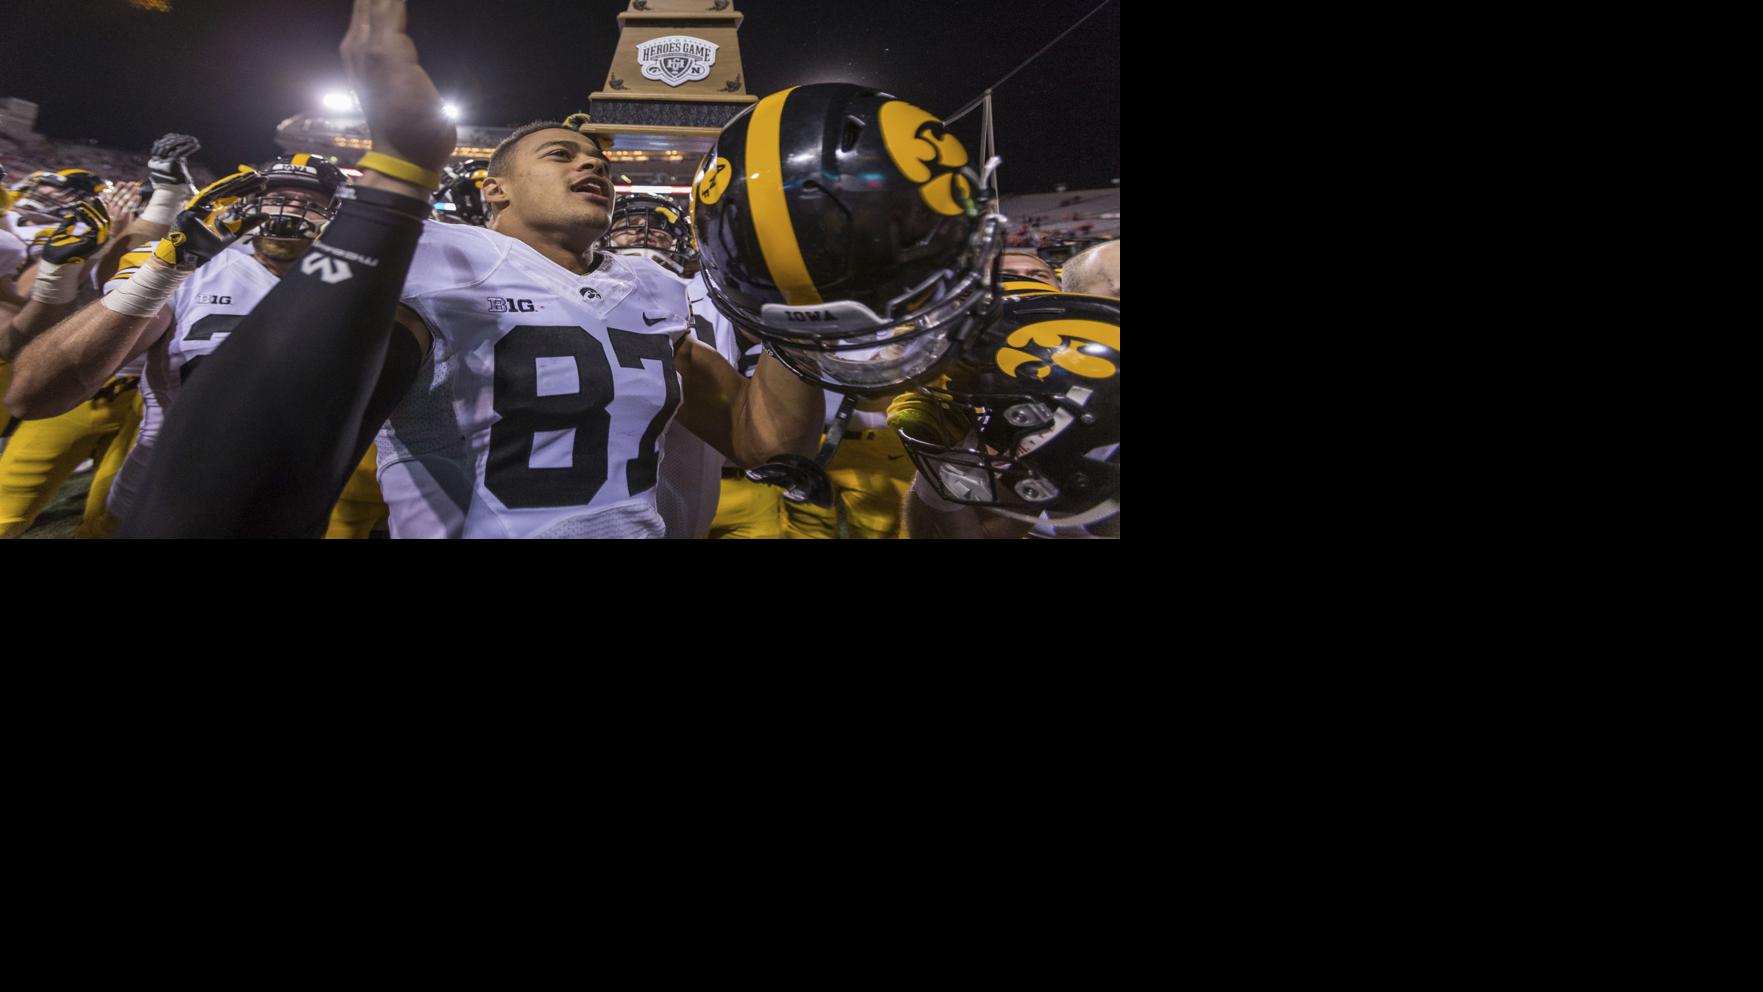 Hawkeyes working to leave a legacy with bowl win